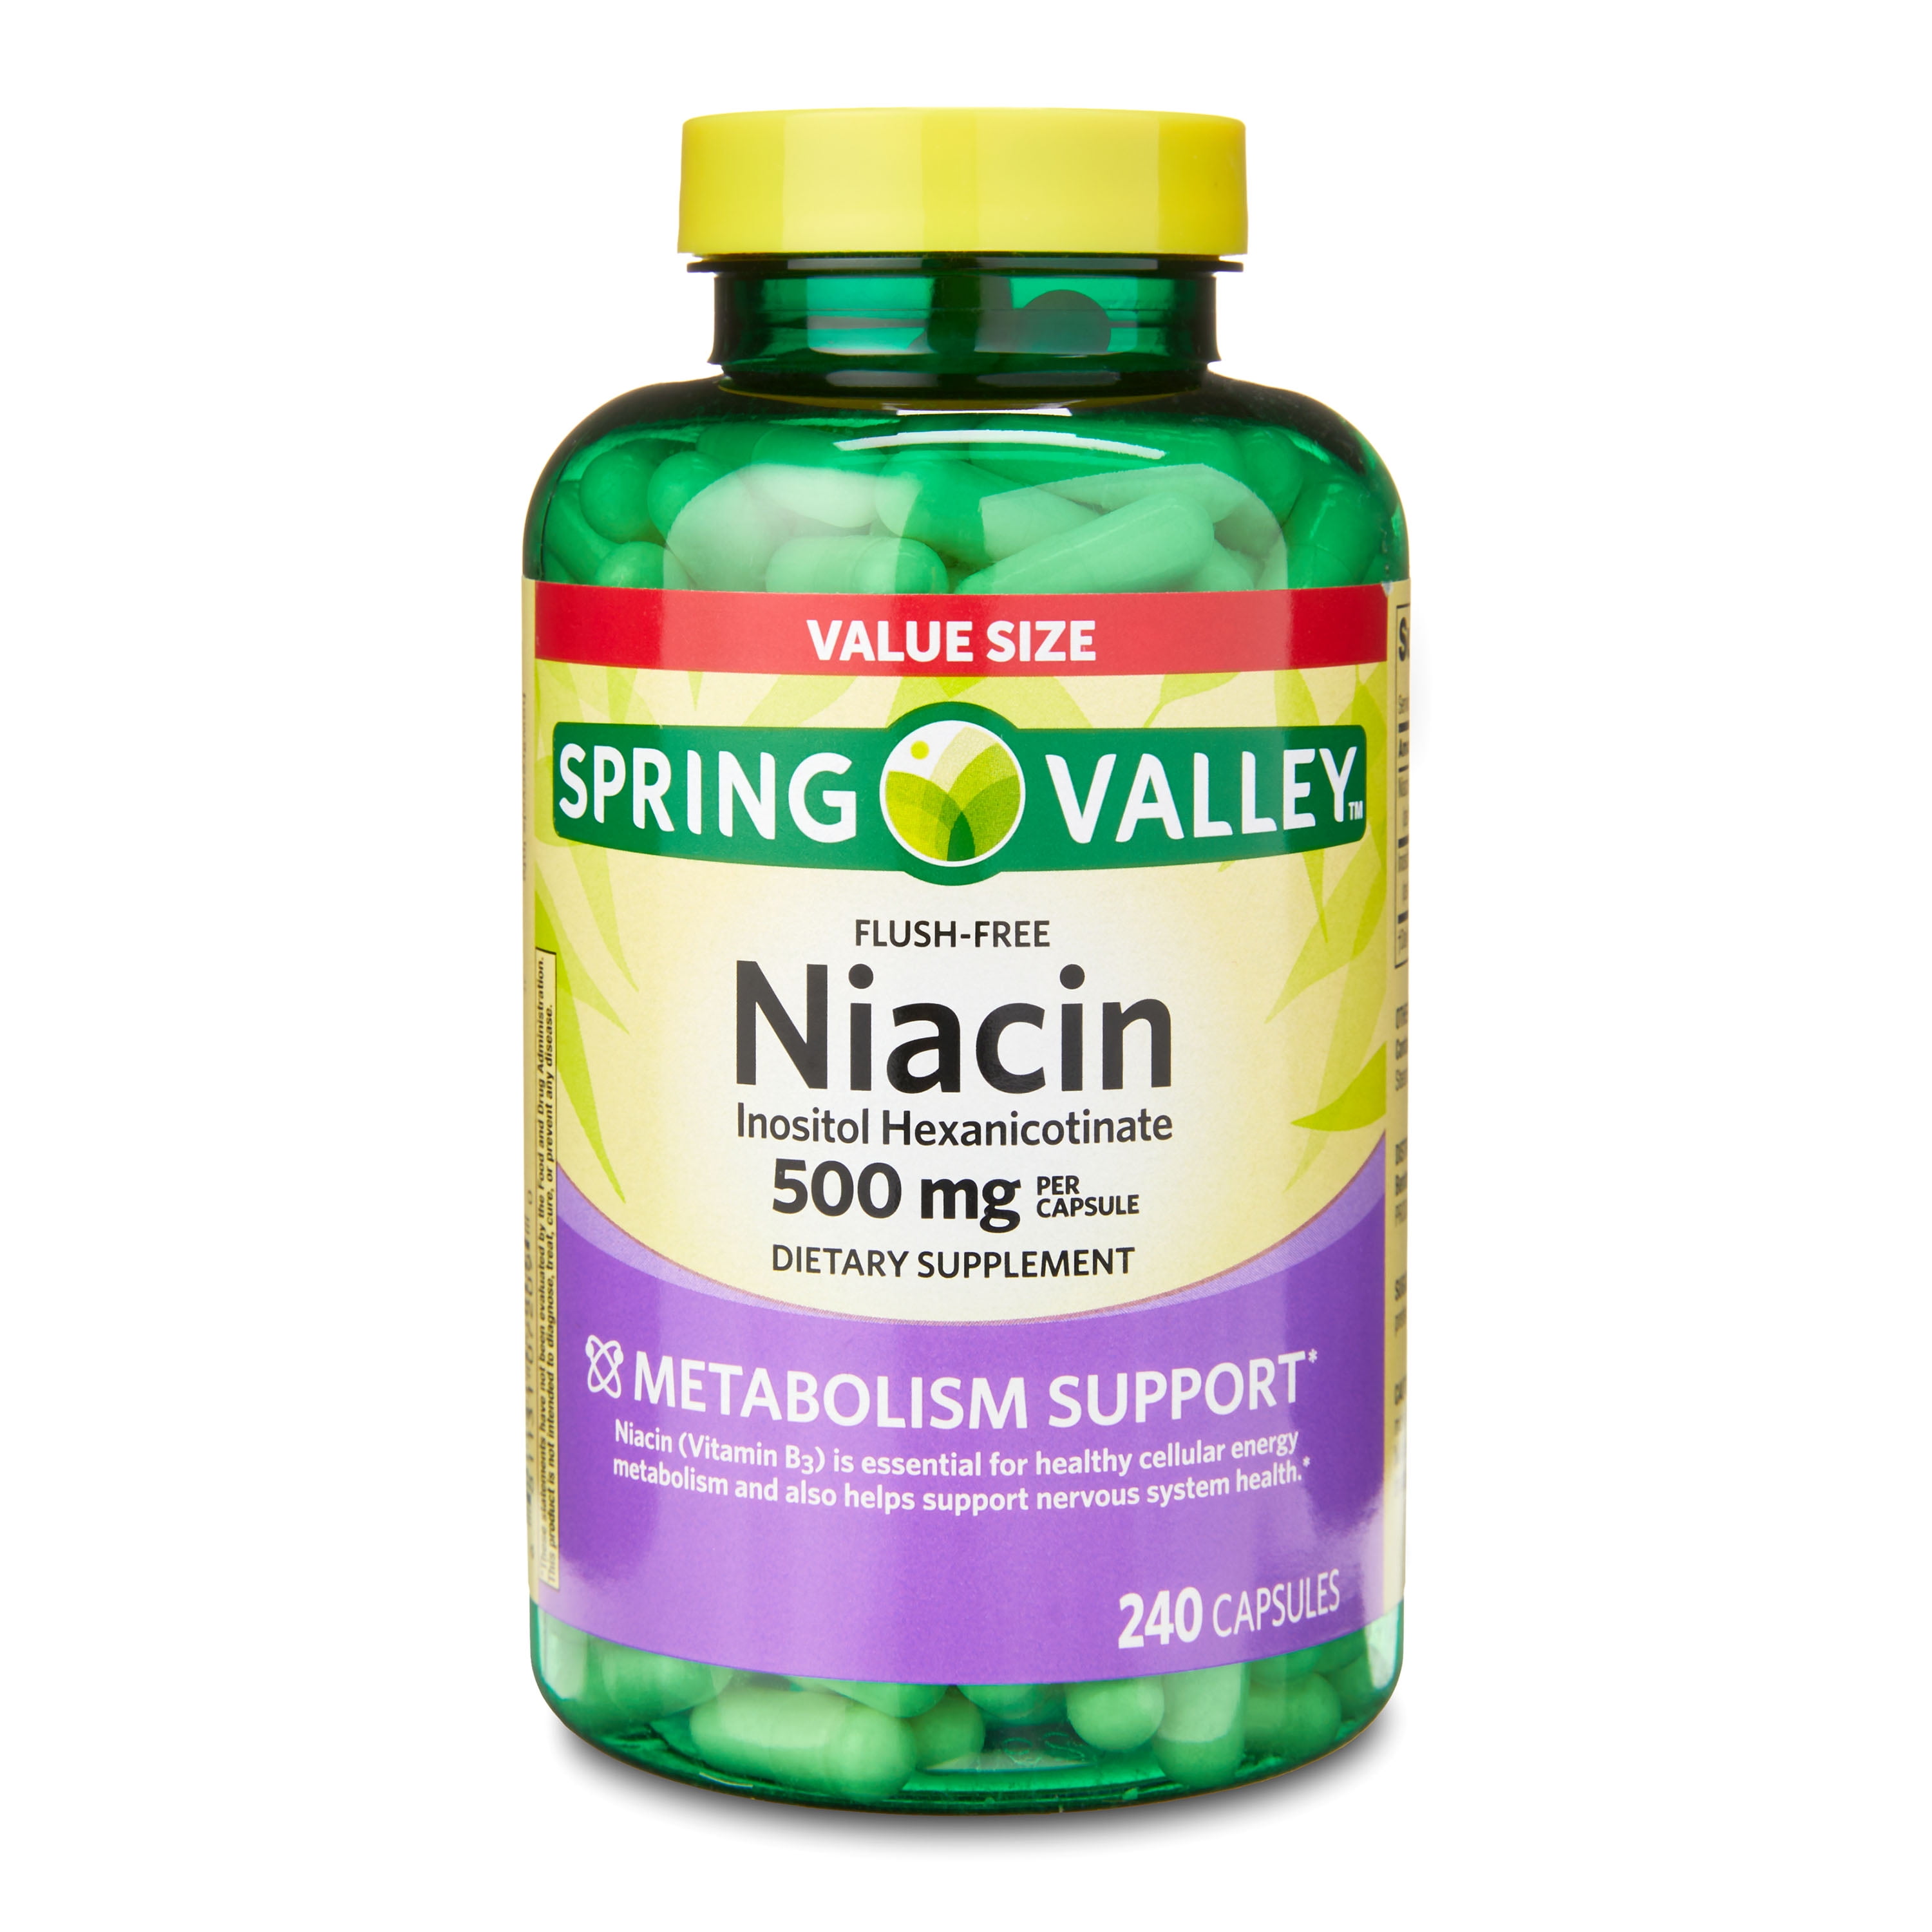 Spring Valley Niacin Supplement, 500 mg Capsules, 240 Count